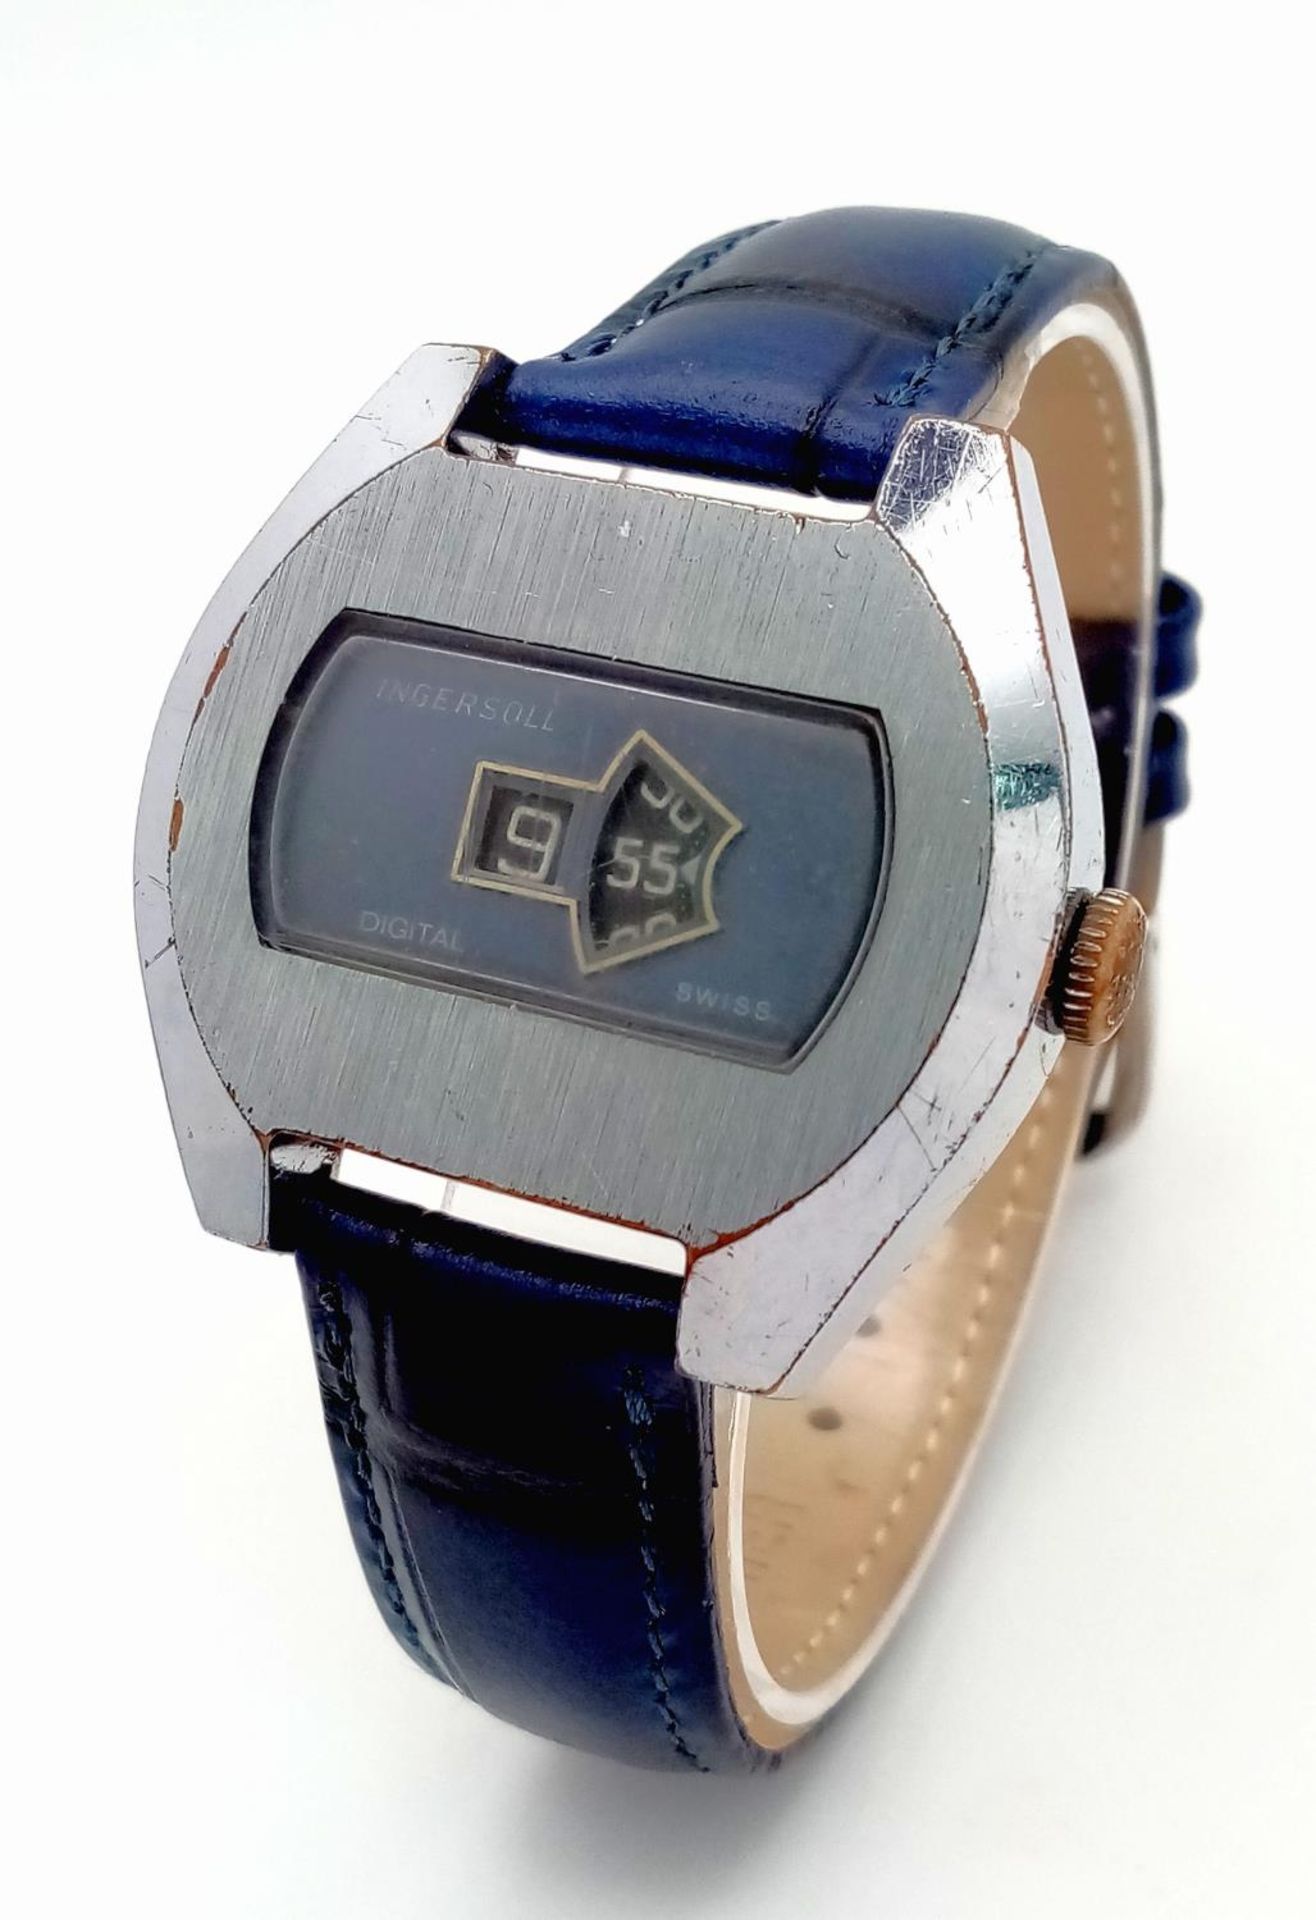 A Vintage Ingersoll Jump Watch. Blue leather strap. Stainless steel case - 38mm. Metallic grey